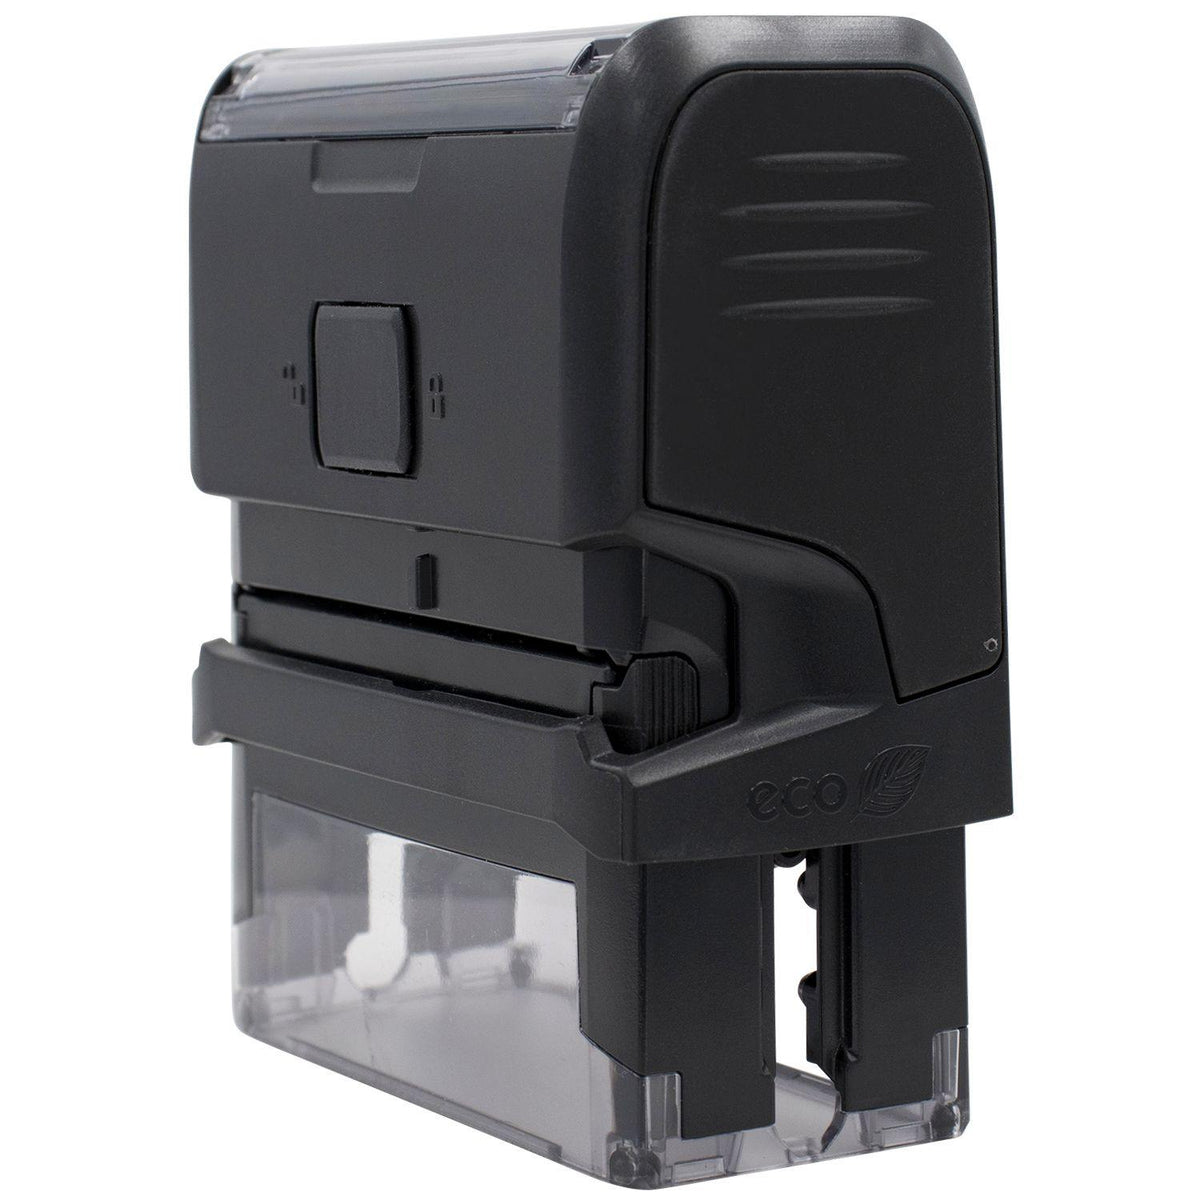 Large Self-Inking Narrow Posted Stamp - Engineer Seal Stamps - Brand_Trodat, Impression Size_Large, Stamp Type_Self-Inking Stamp, Type of Use_Office